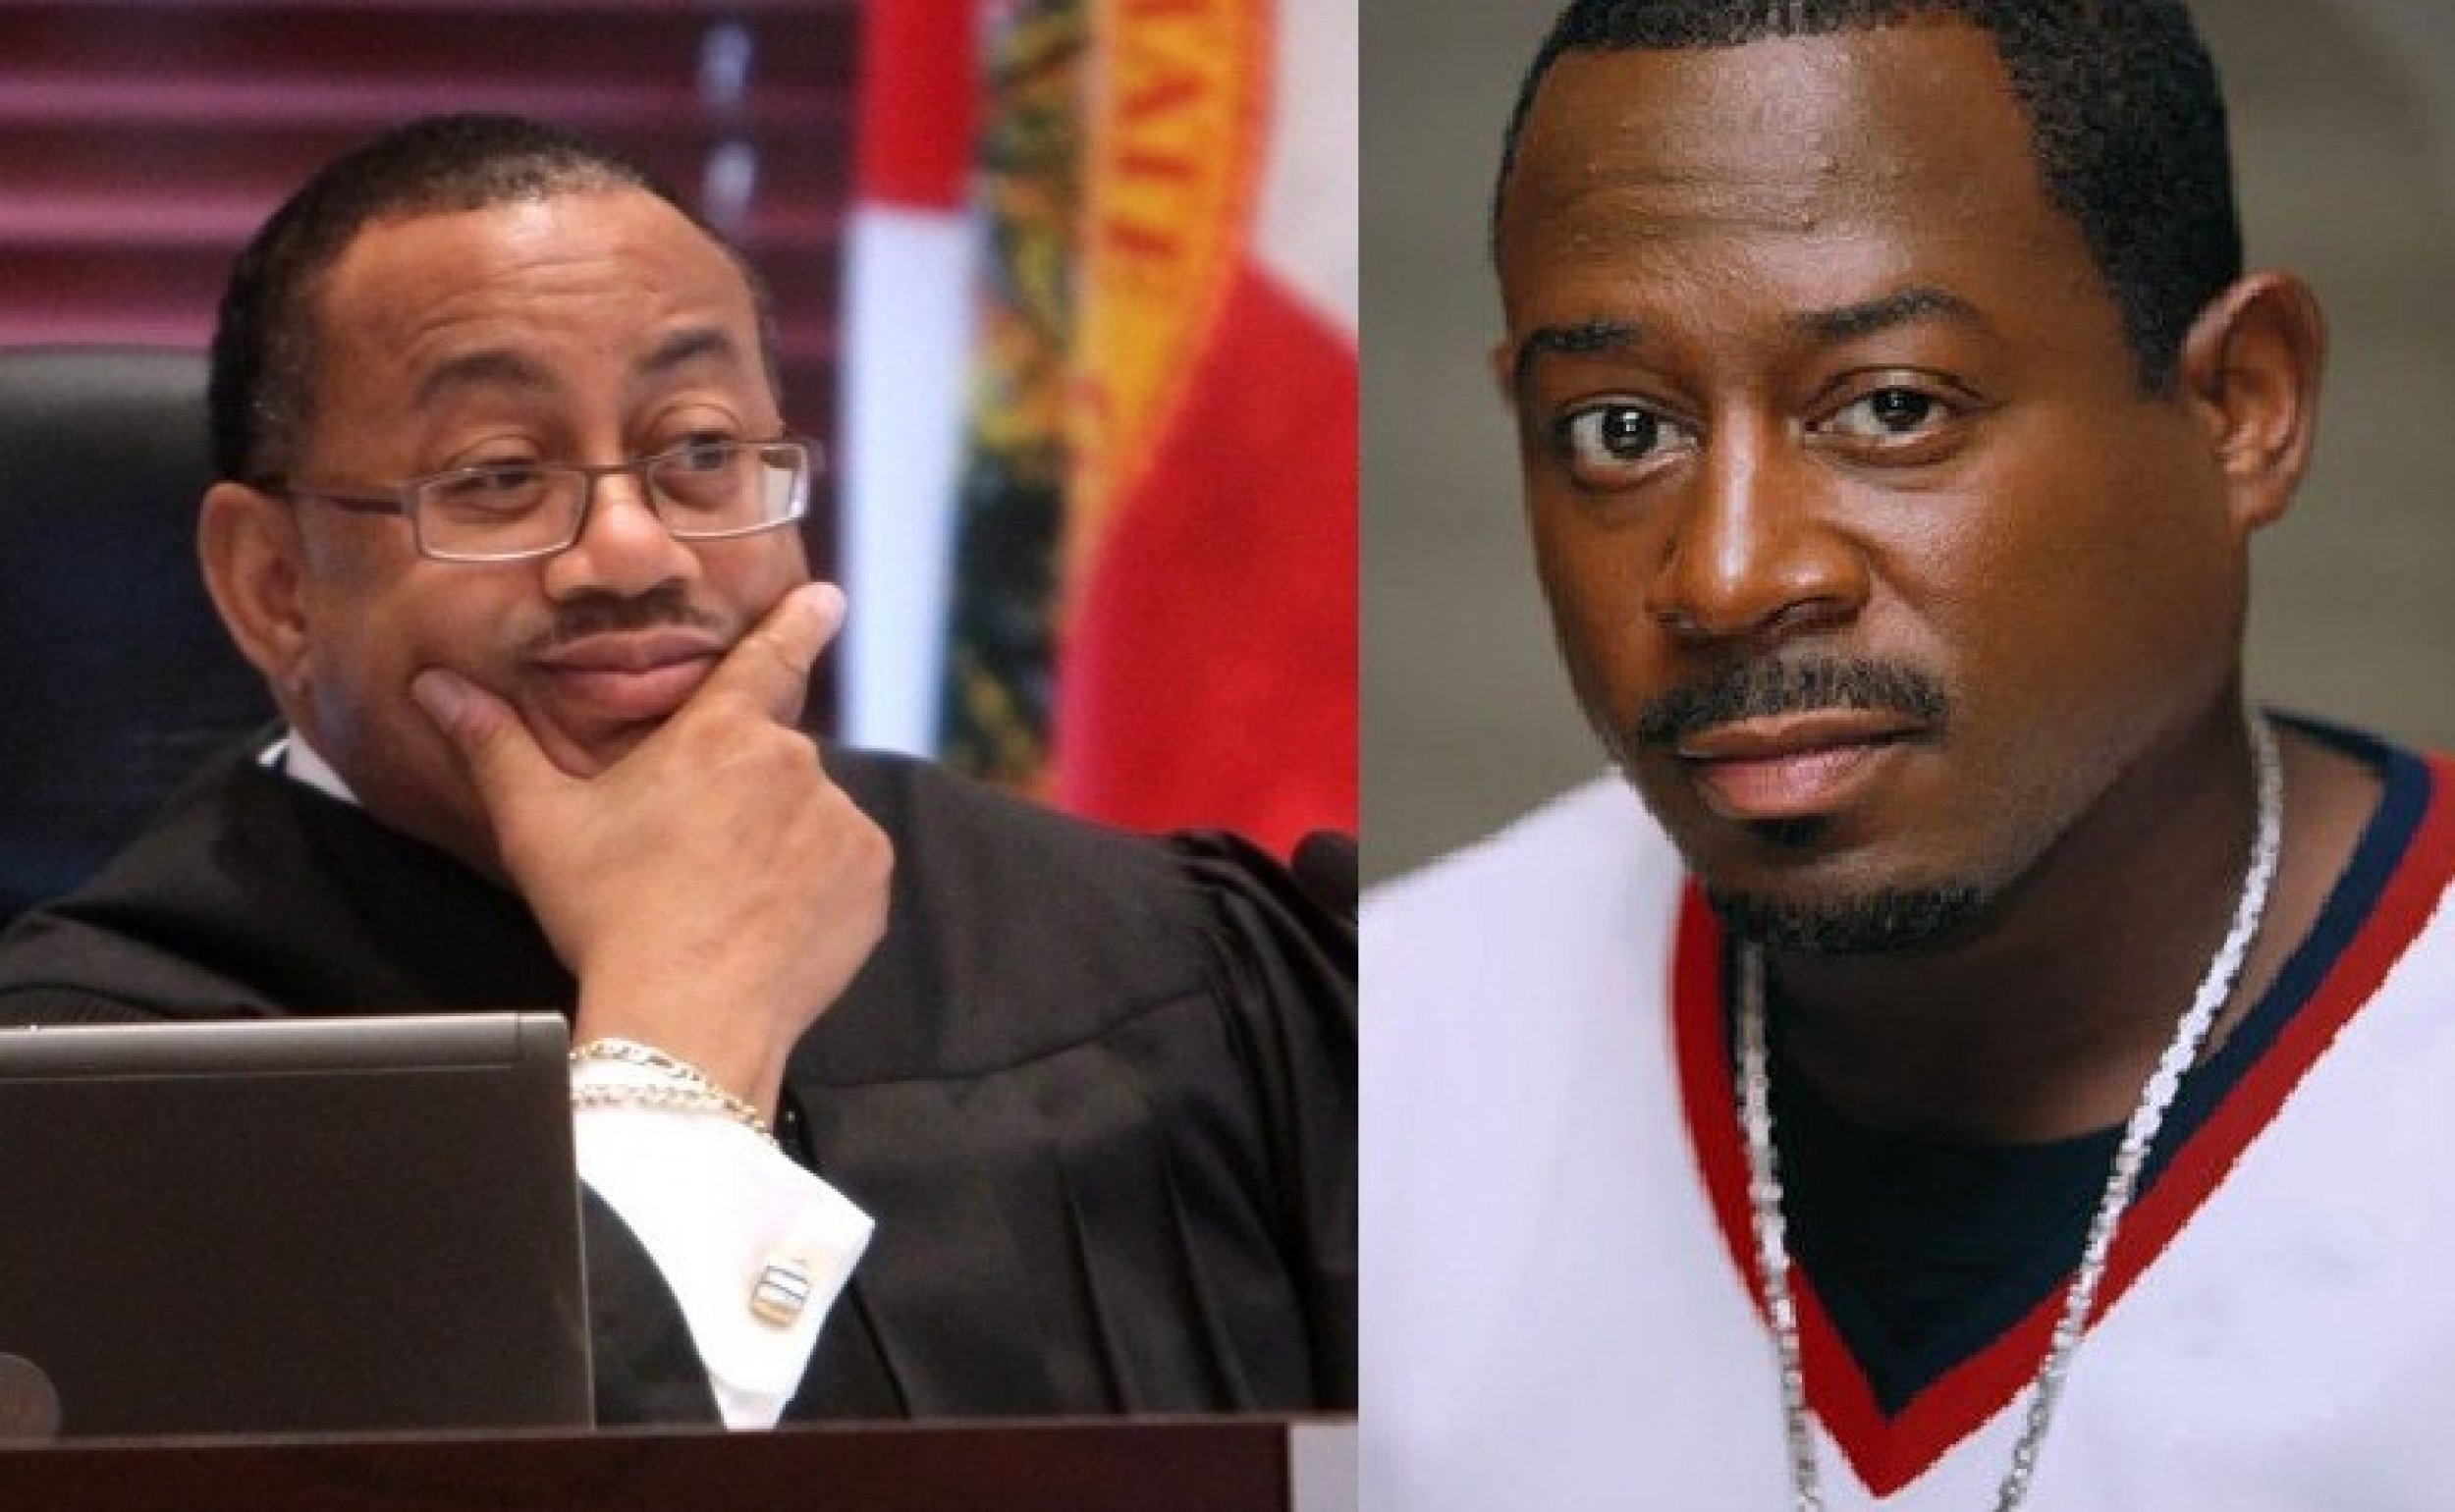 Martin Lawrence as Belvin Perry, Chief Judge of the Murder Trial